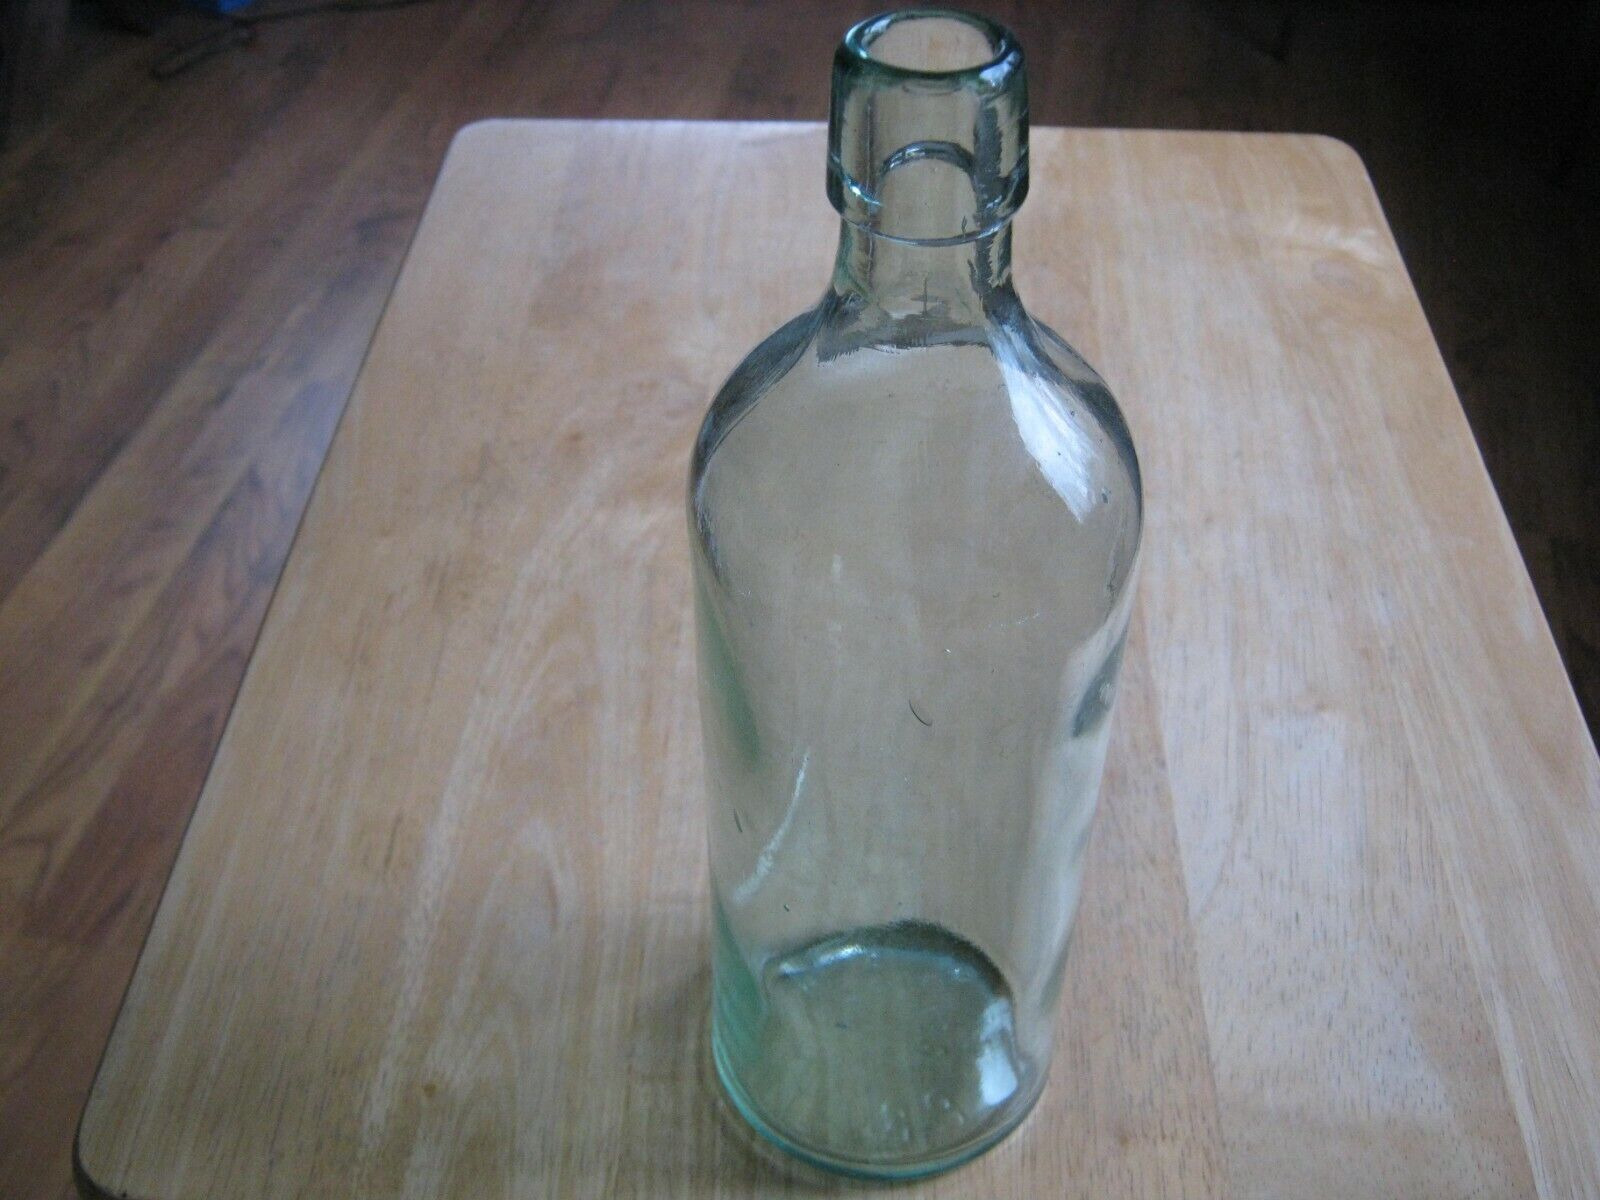 Dr. S. B. H. & Co. Green Tint Medicine Bottle 9 1/4 inches tall